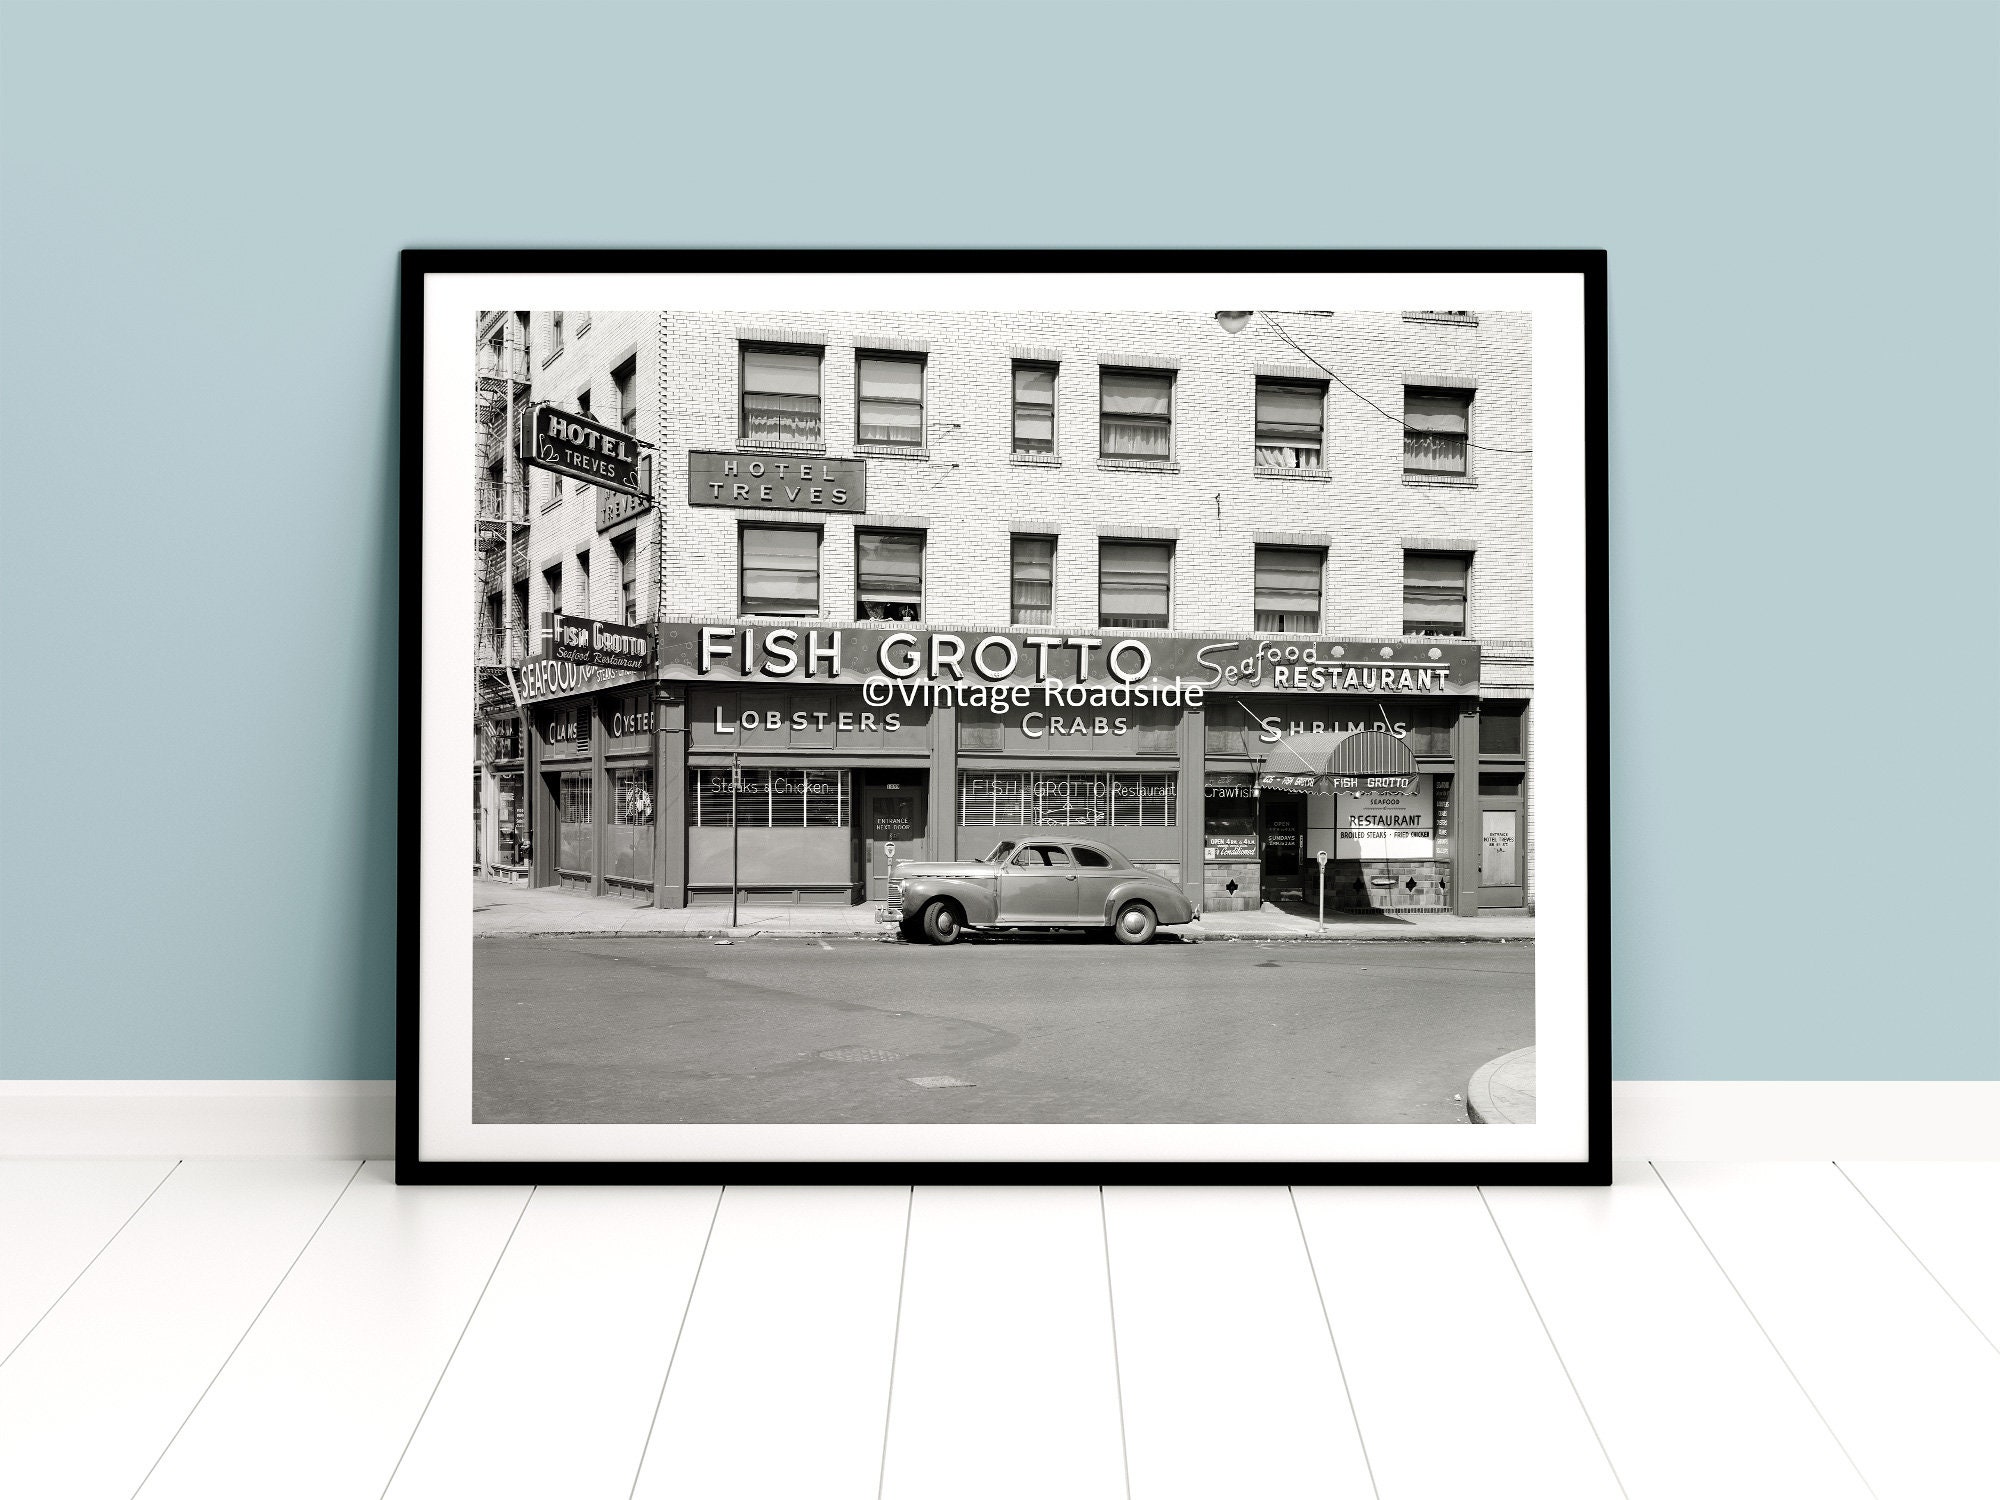 The Fish Grotto, Portland Oregon Photo, Archival Print From Original 1947 Negative, Downtown Portland, Seafood Restaurant, Old Pdx